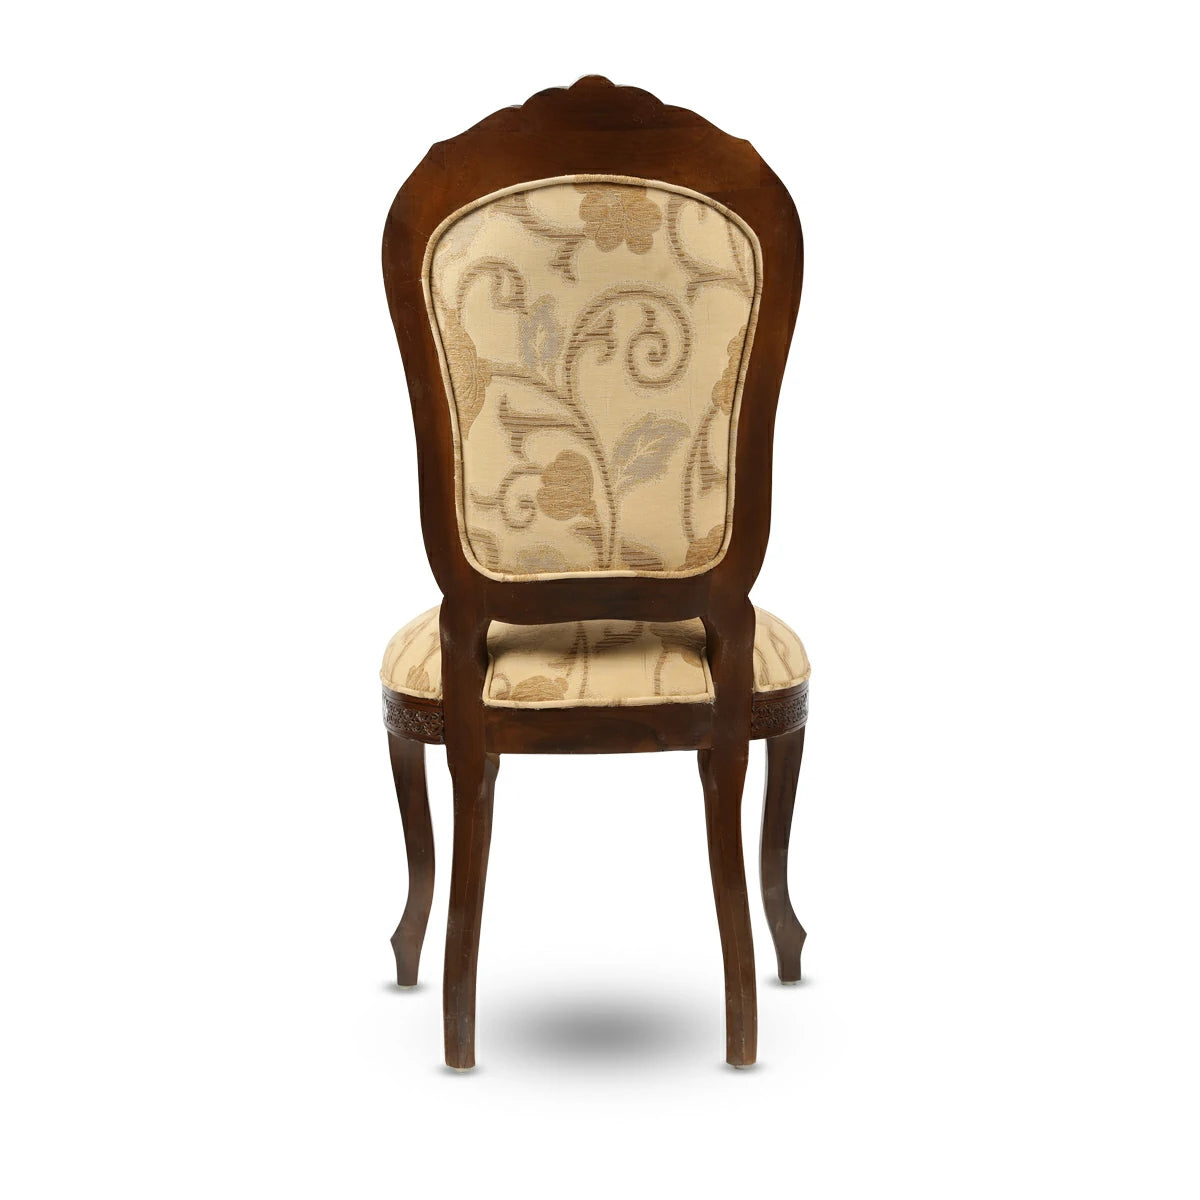 Back View of Antique Short Back Syrian Chair